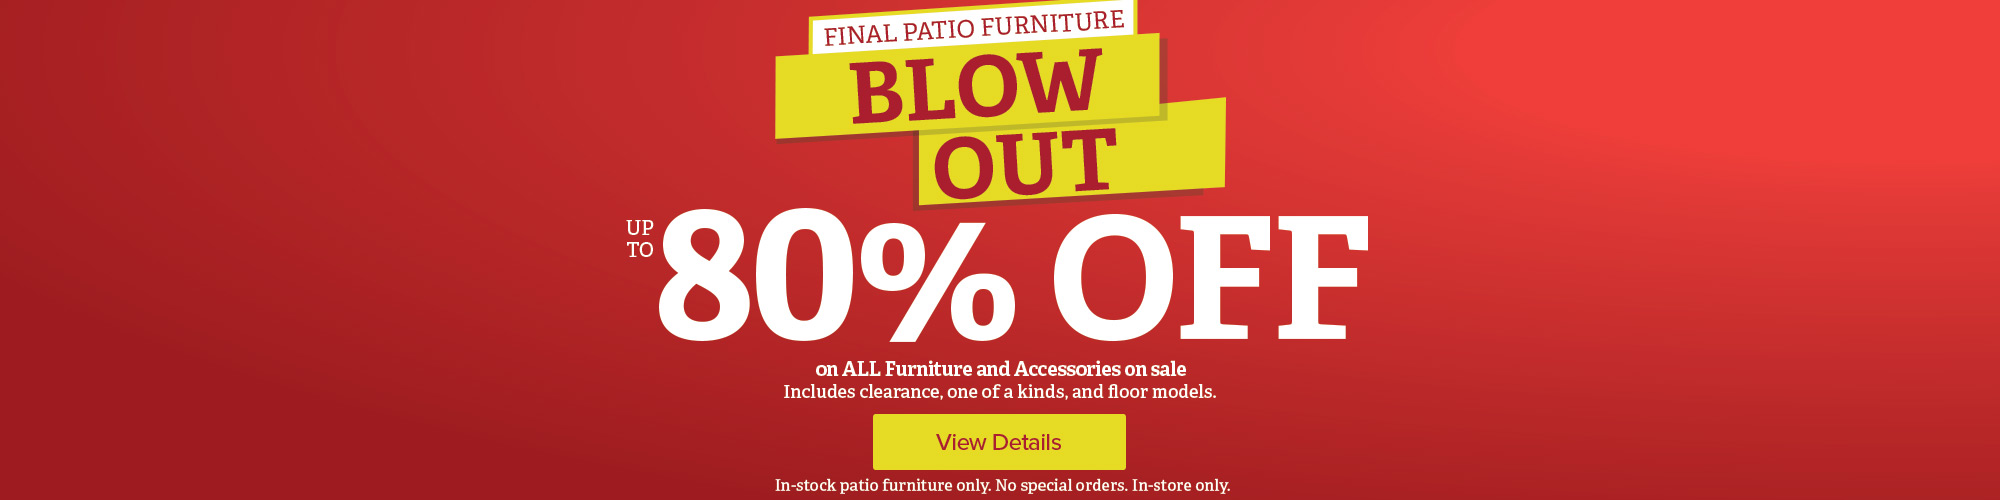 Shop Patio Furniture from brands like Paragon Casual, Seaside Casual, South Sea Outdoor Living, and more. View Patio Store Locations